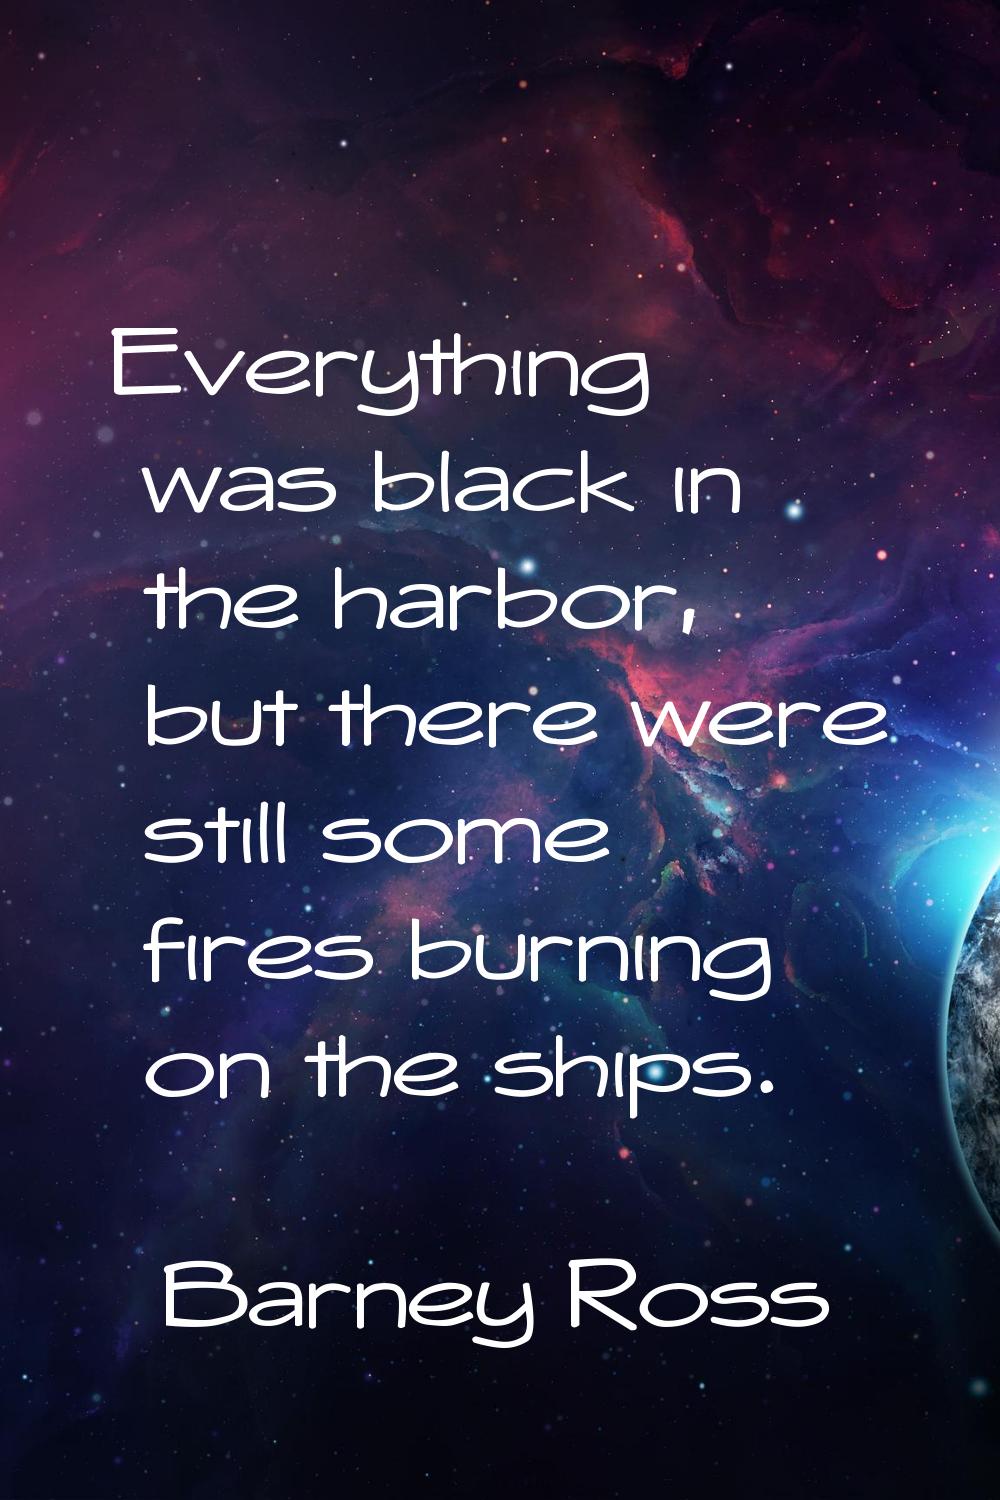 Everything was black in the harbor, but there were still some fires burning on the ships.